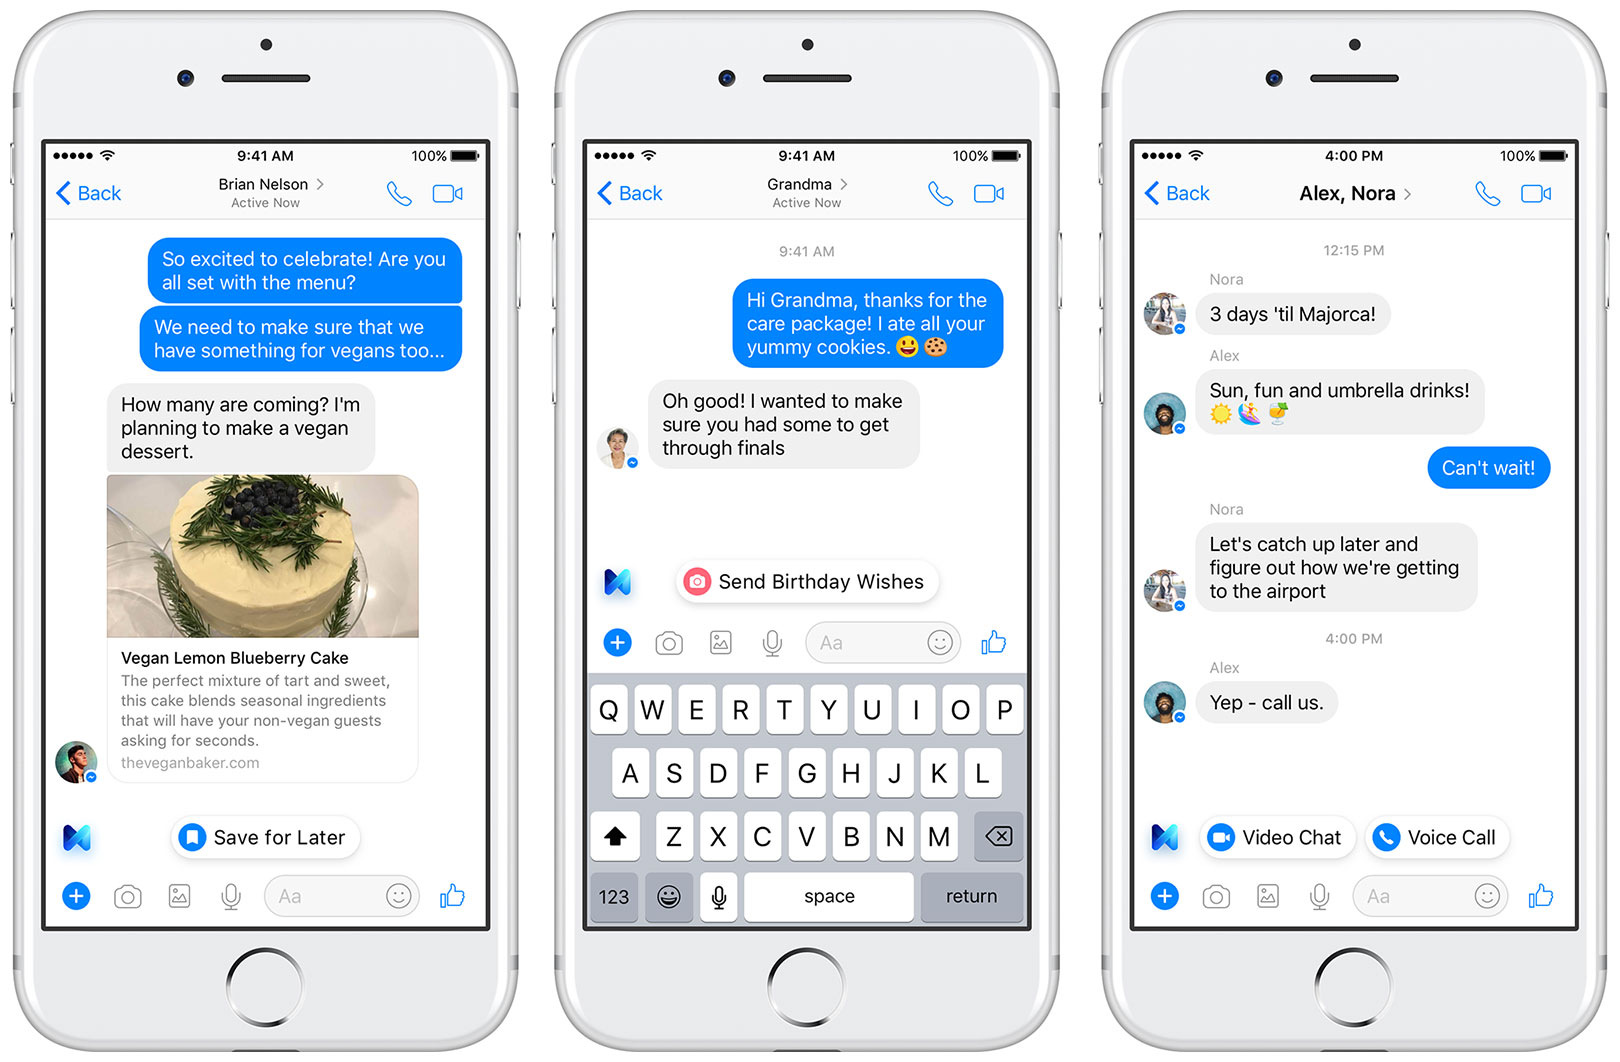 Facebook Messenger S Ai Assistant Helps You Save Links For Later Engadget